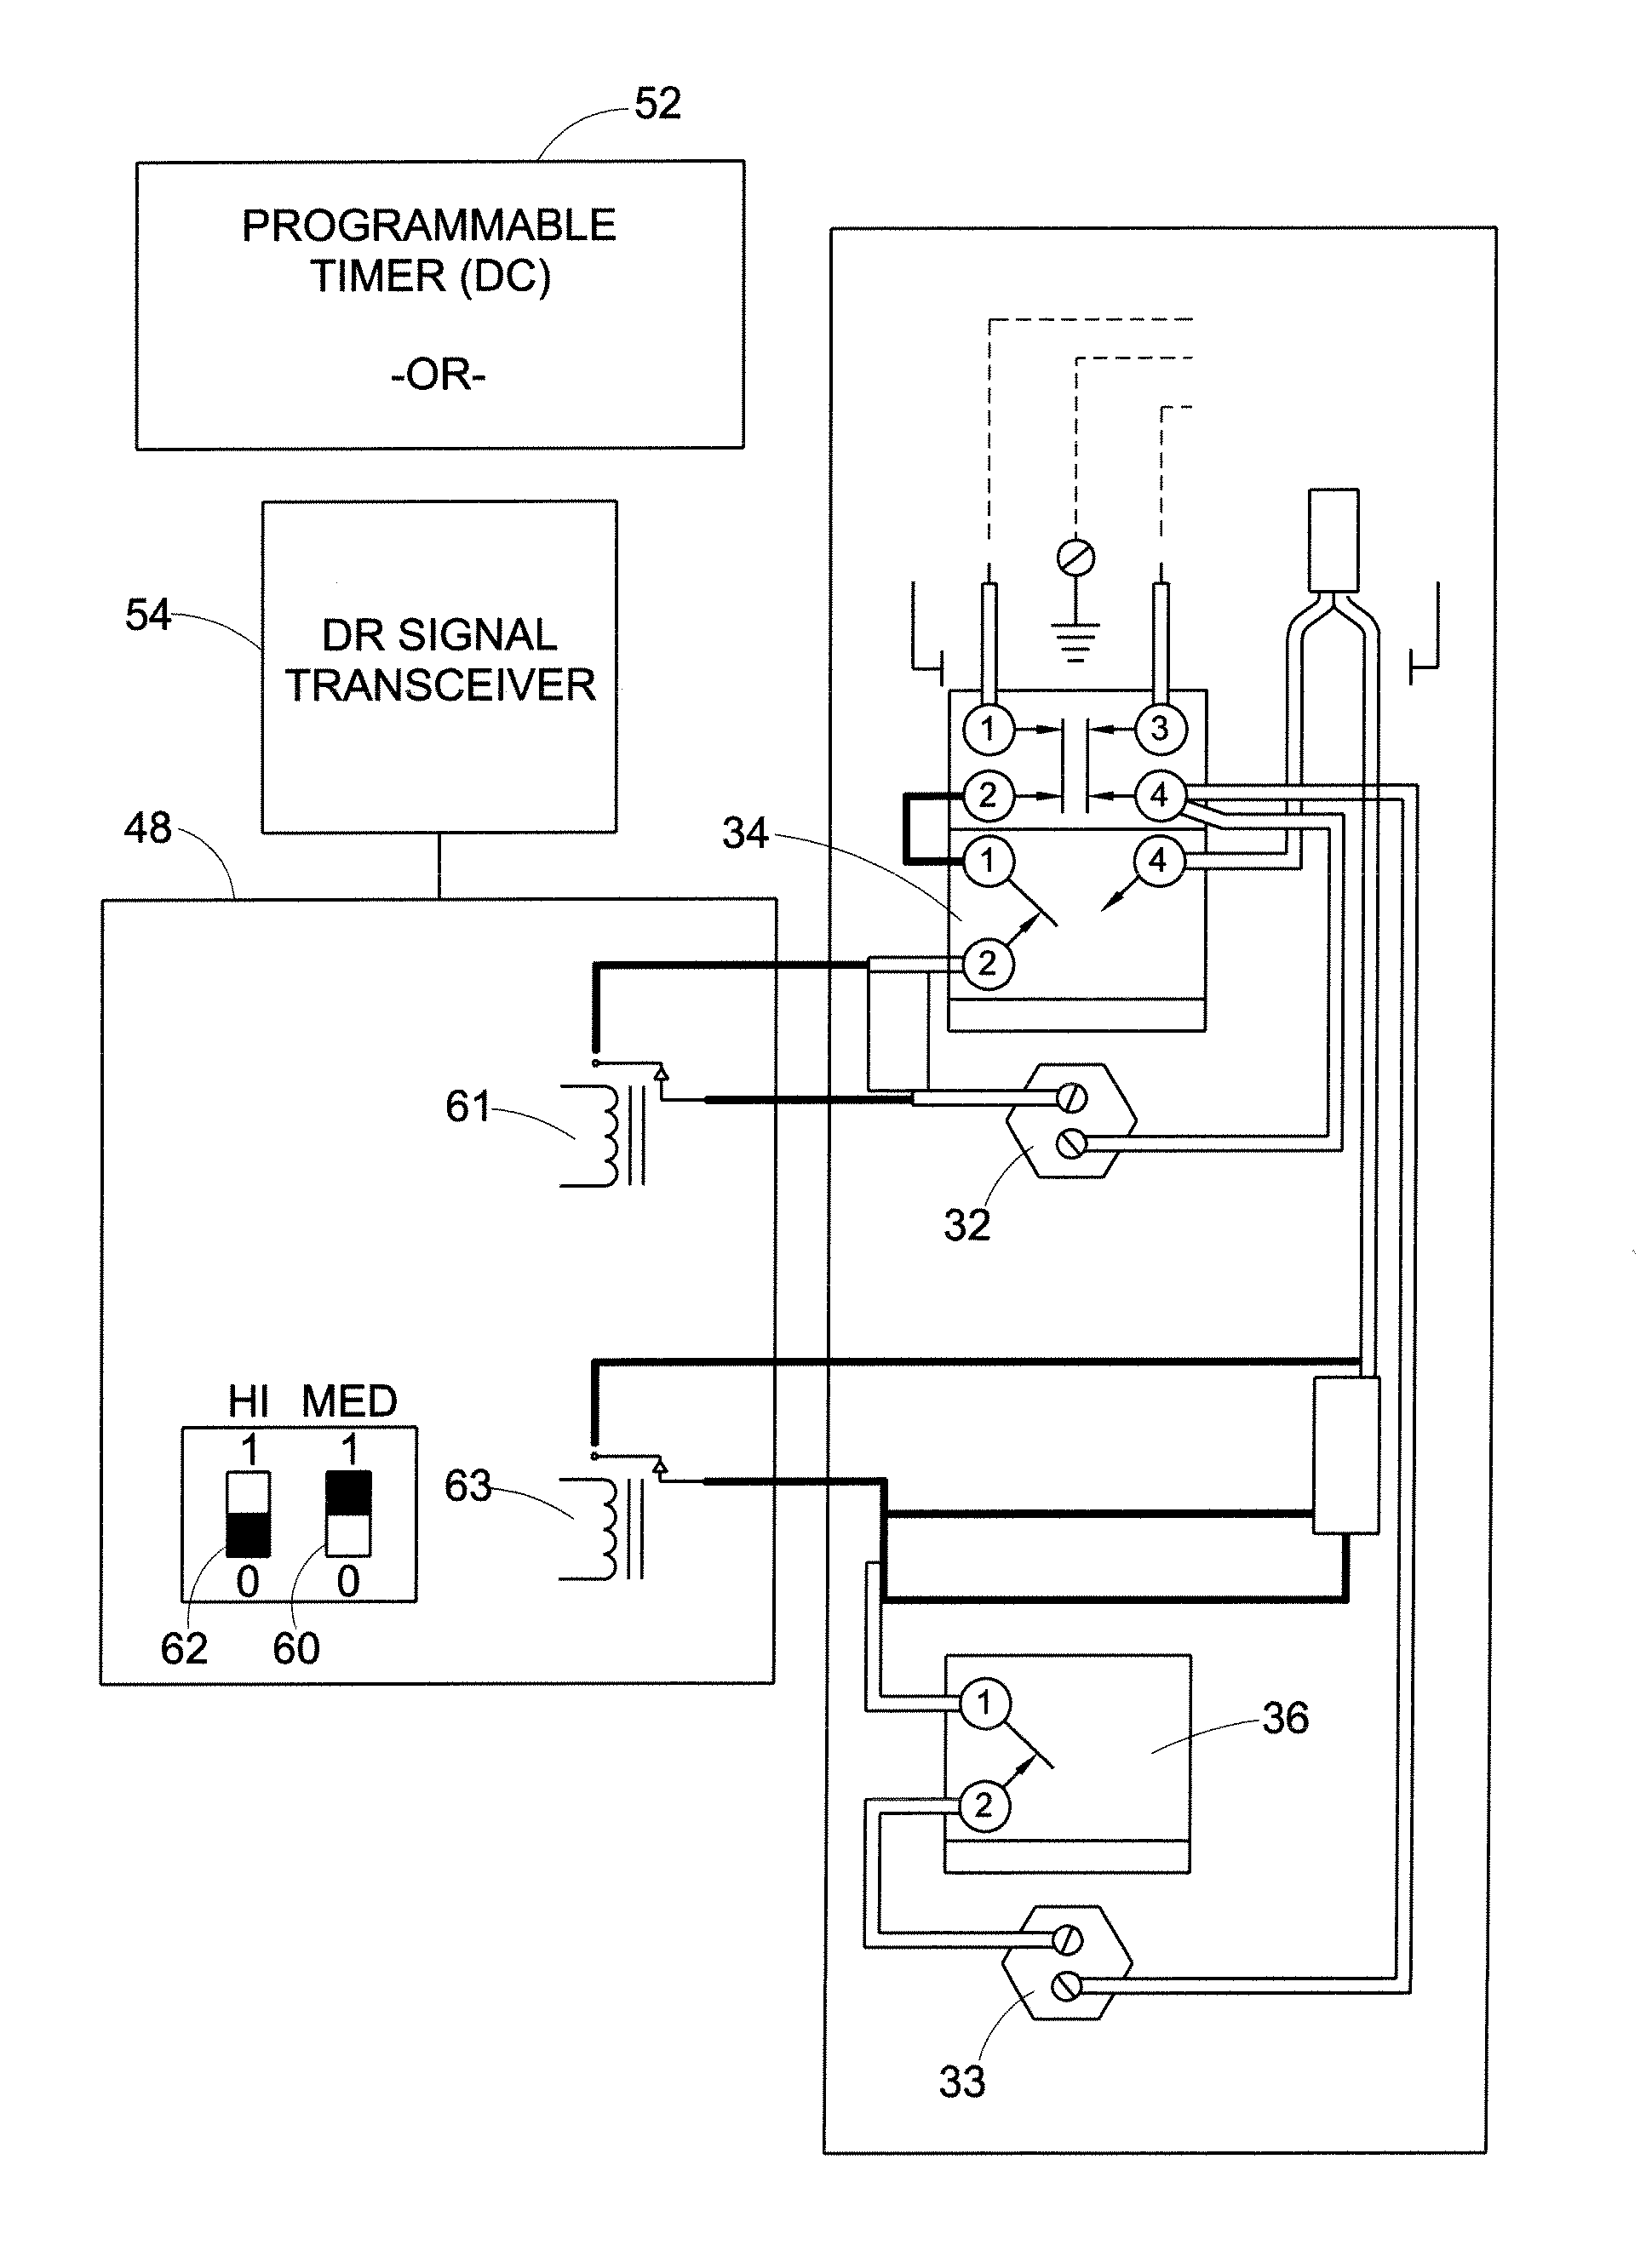 Water heating control and storage system